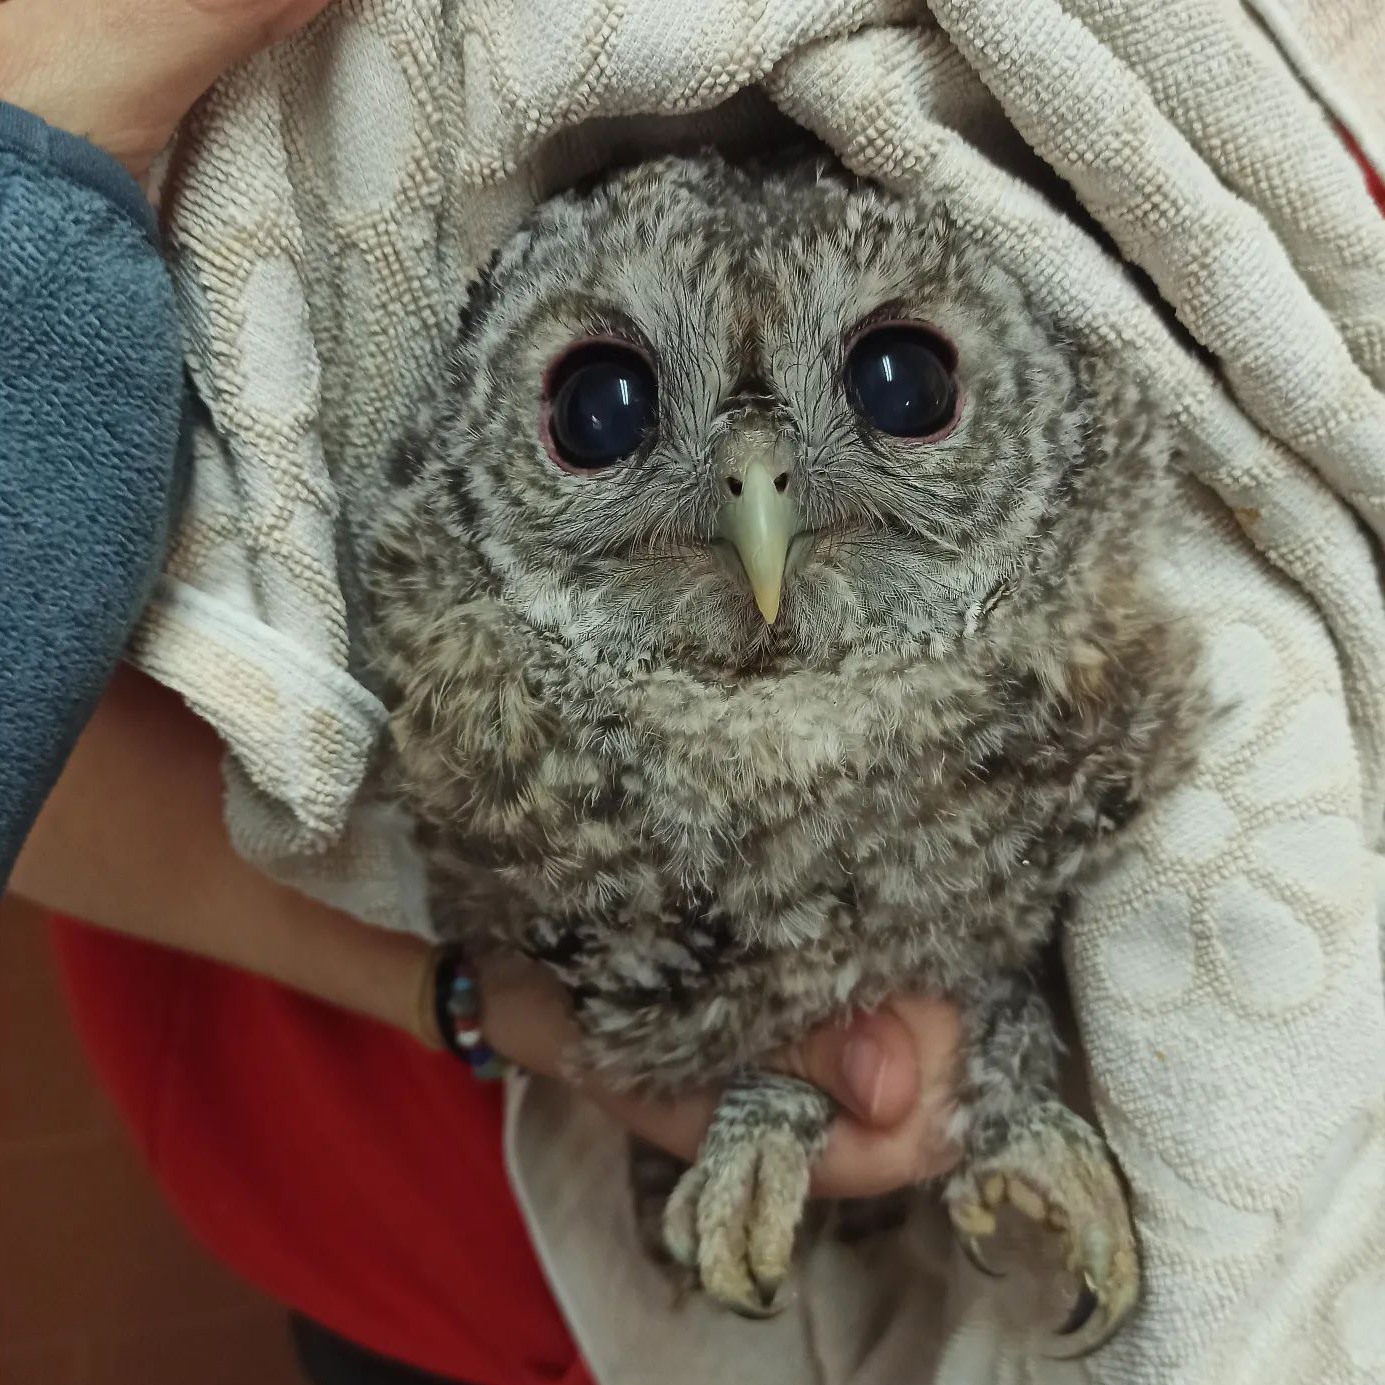 Tawny owl chick grows up fast